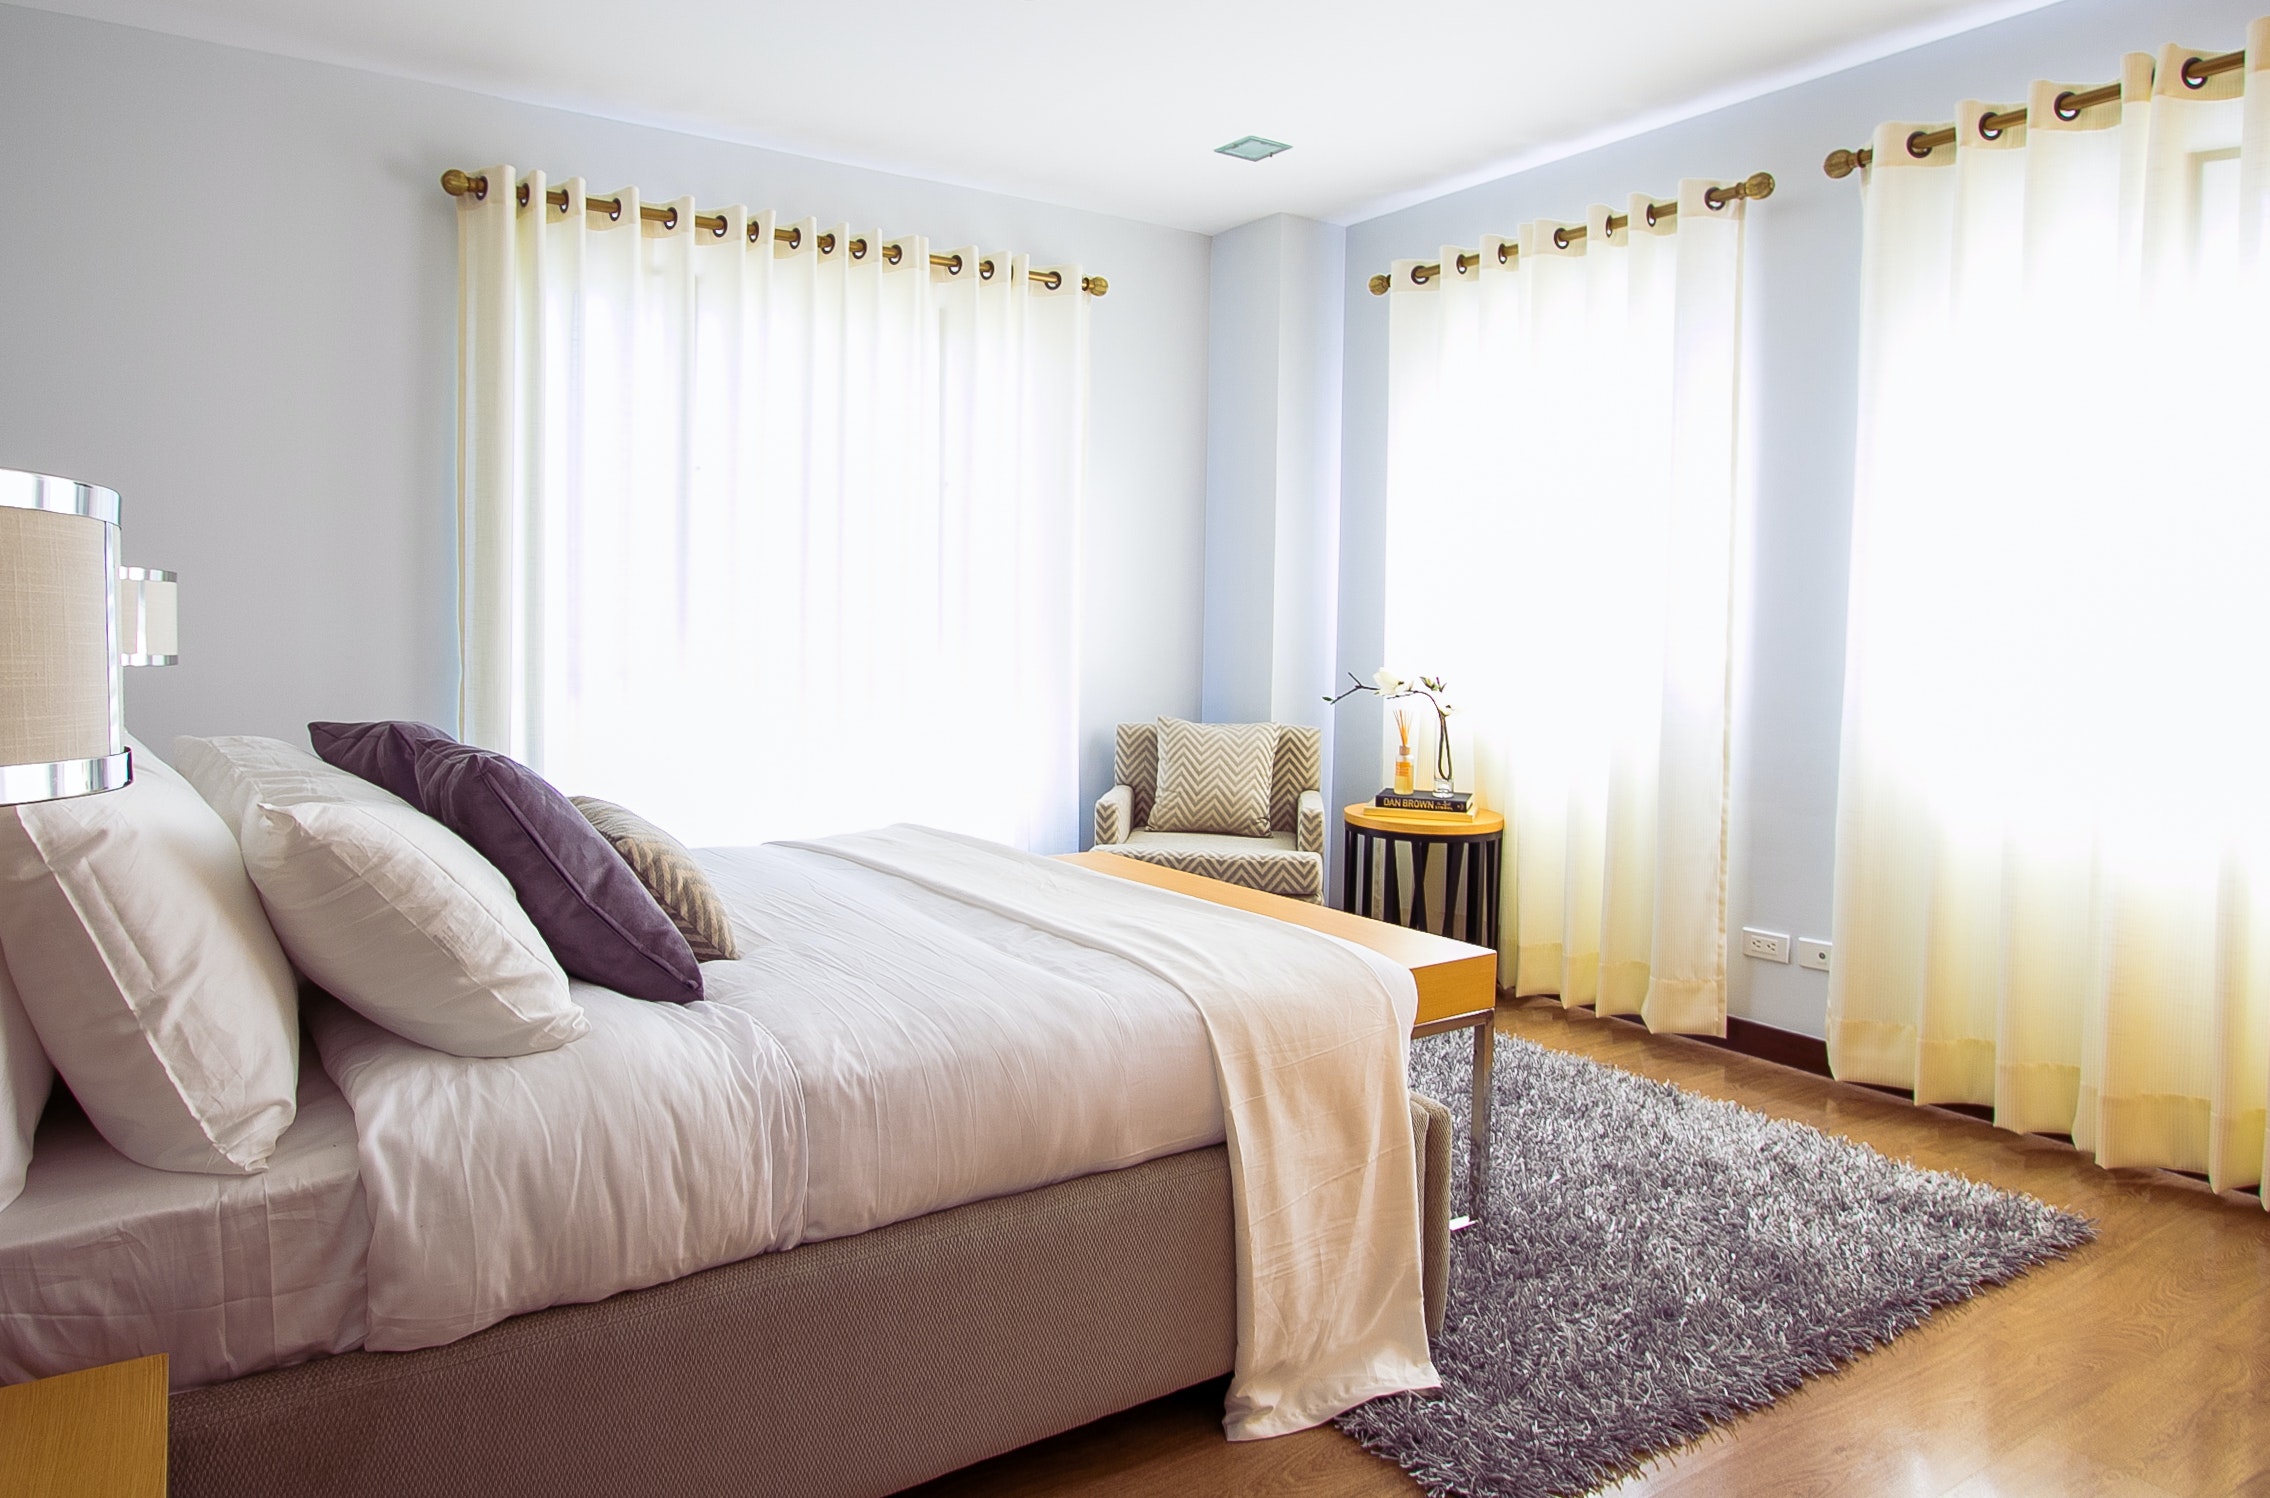 Everything You Need to Know Before Renting Out a Room in Your House